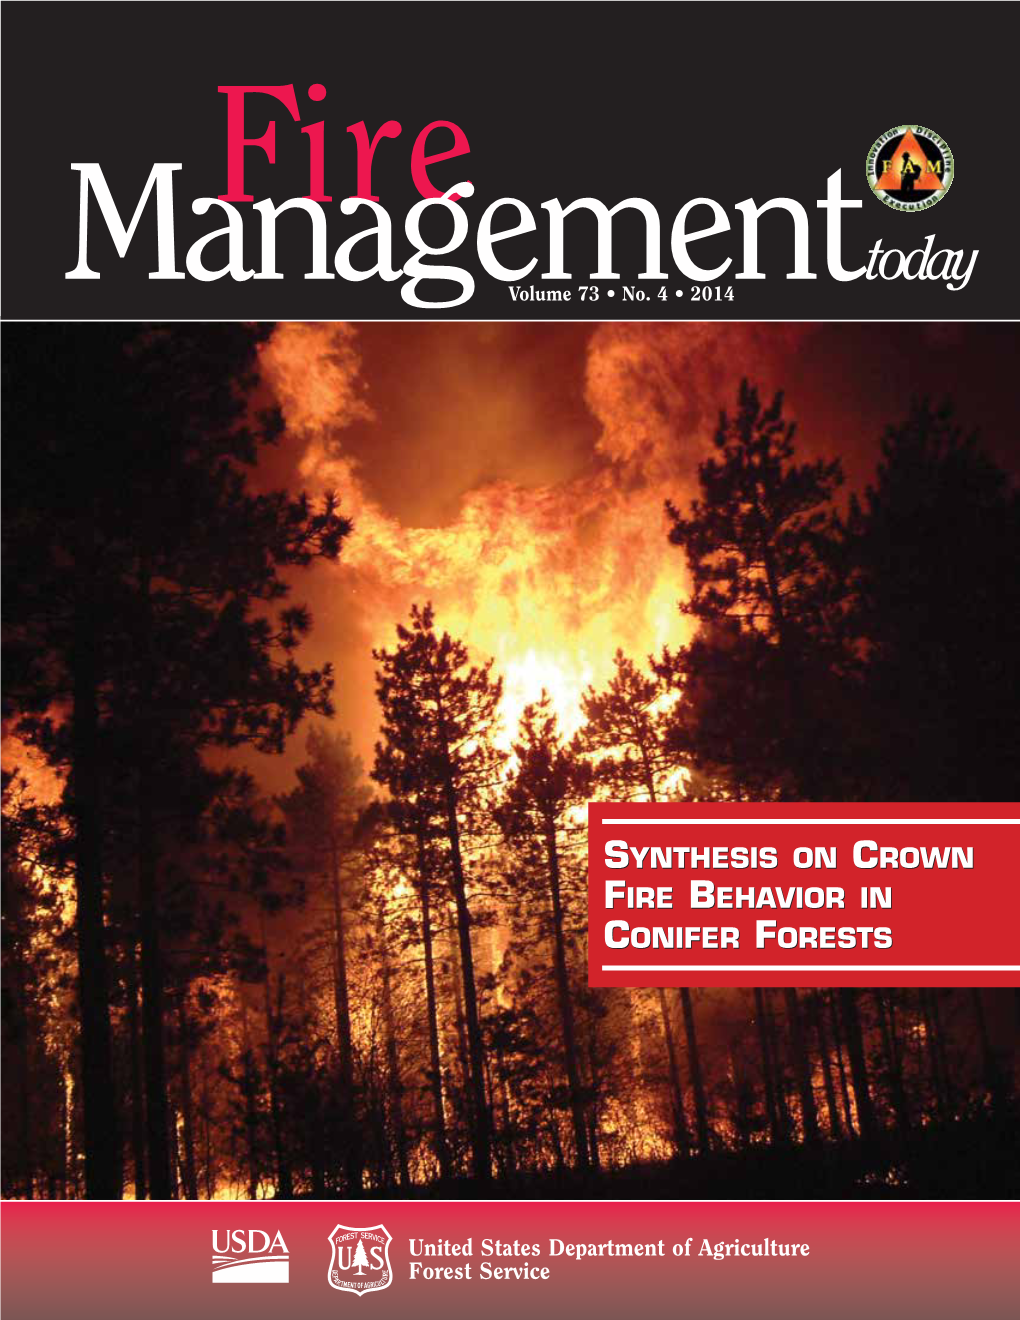 Synthesis on Crown Fire Behavior in Conifer Forests Synthesis on Crown Fire Behavior in Conifer Forests